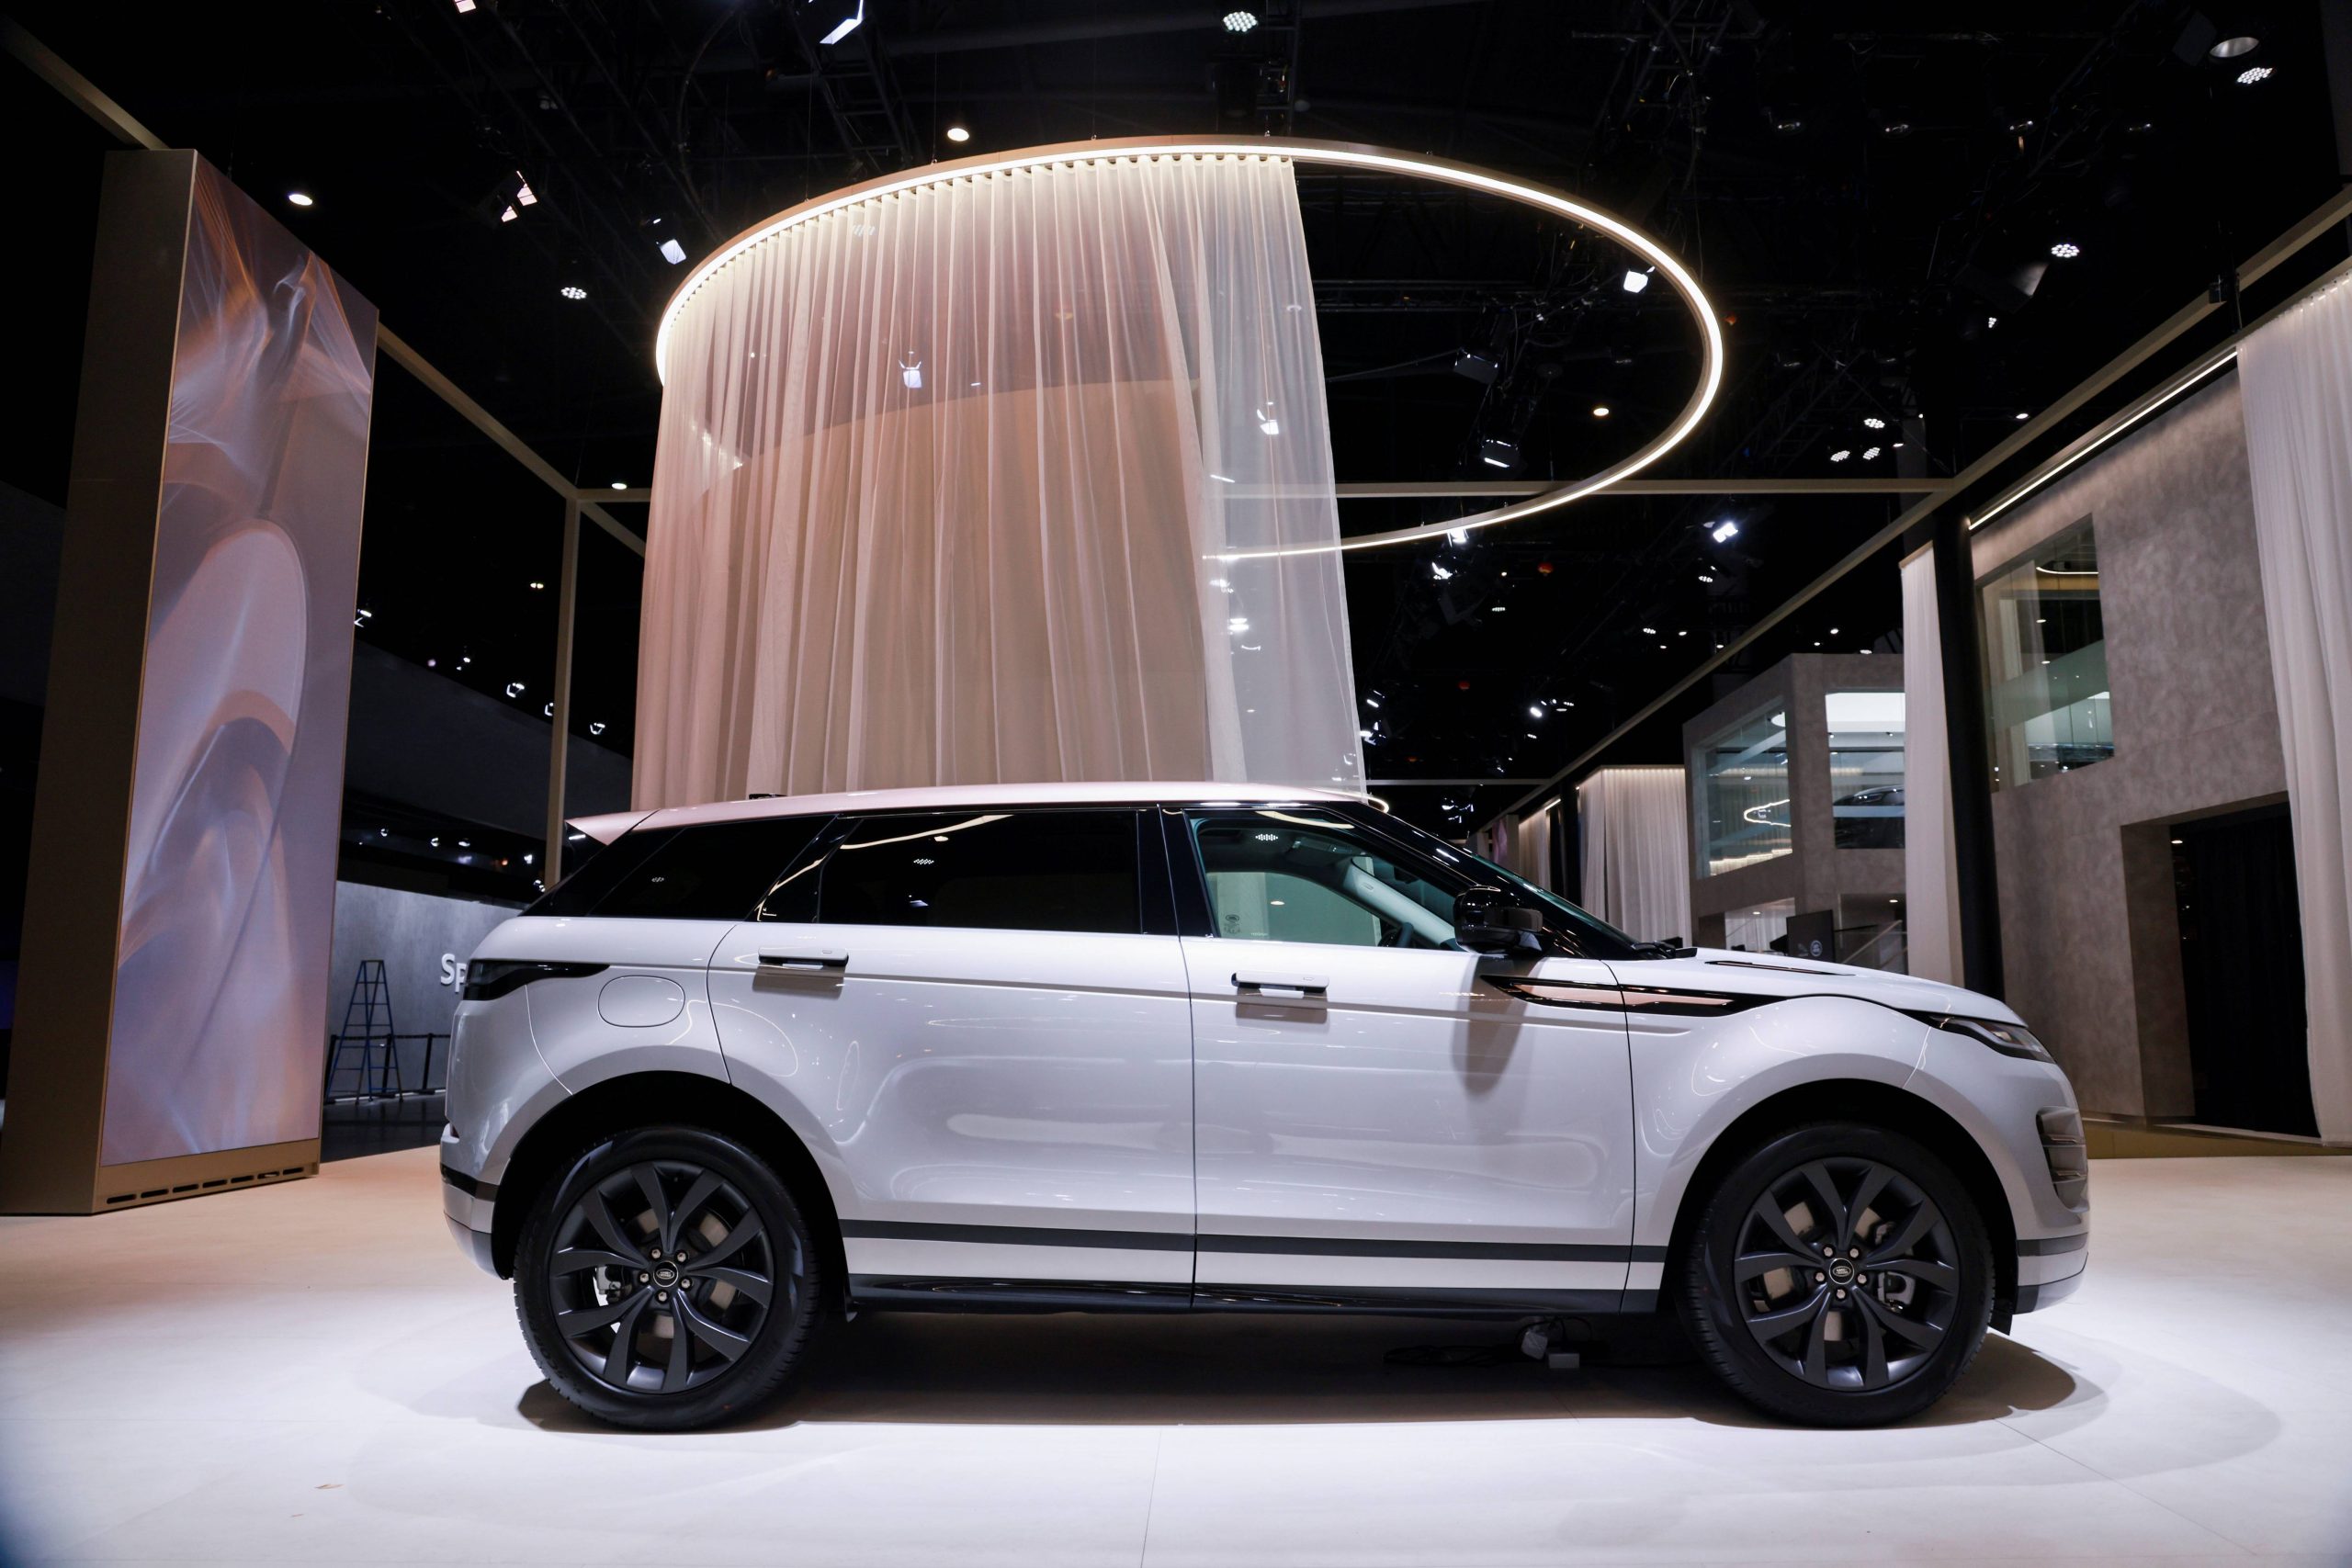 Take the Lead, Embody Brand-new Enhancement22MY Range Rover Evoque L  Launched,Chery Jaguar Land Rover Introduced Multiple Stunning Models at  CDAS 2022 – Chery Jaguar Land Rover